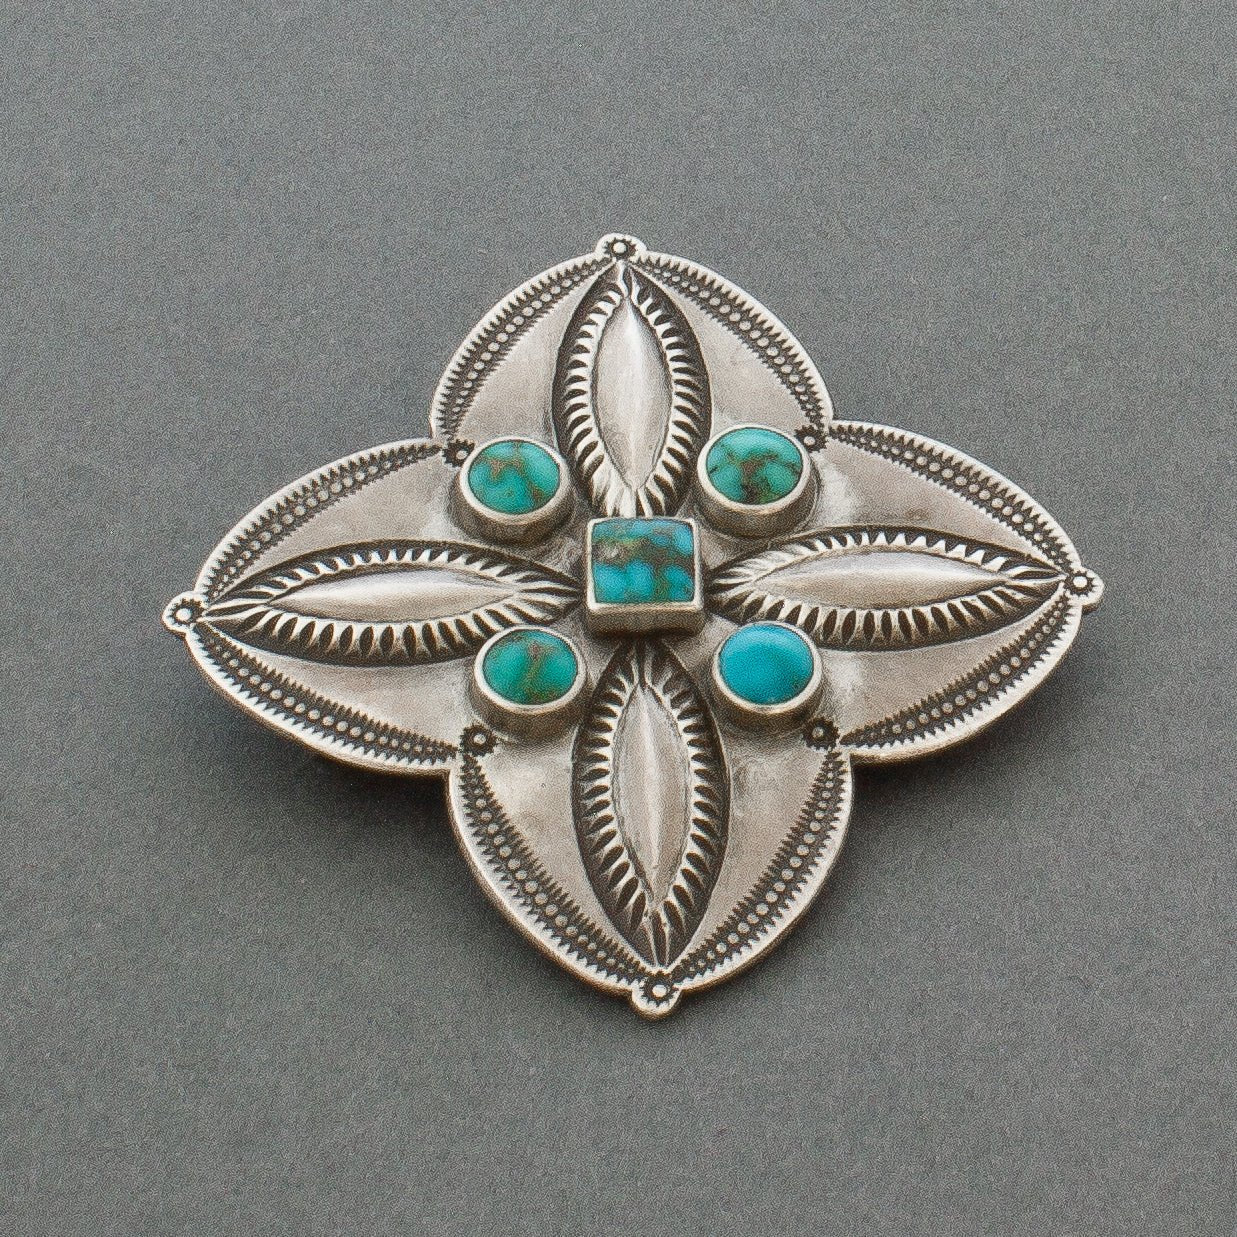 Perry Shorty Silver Repousse Cross Pin with Turquoise - Turquoise & Tufa